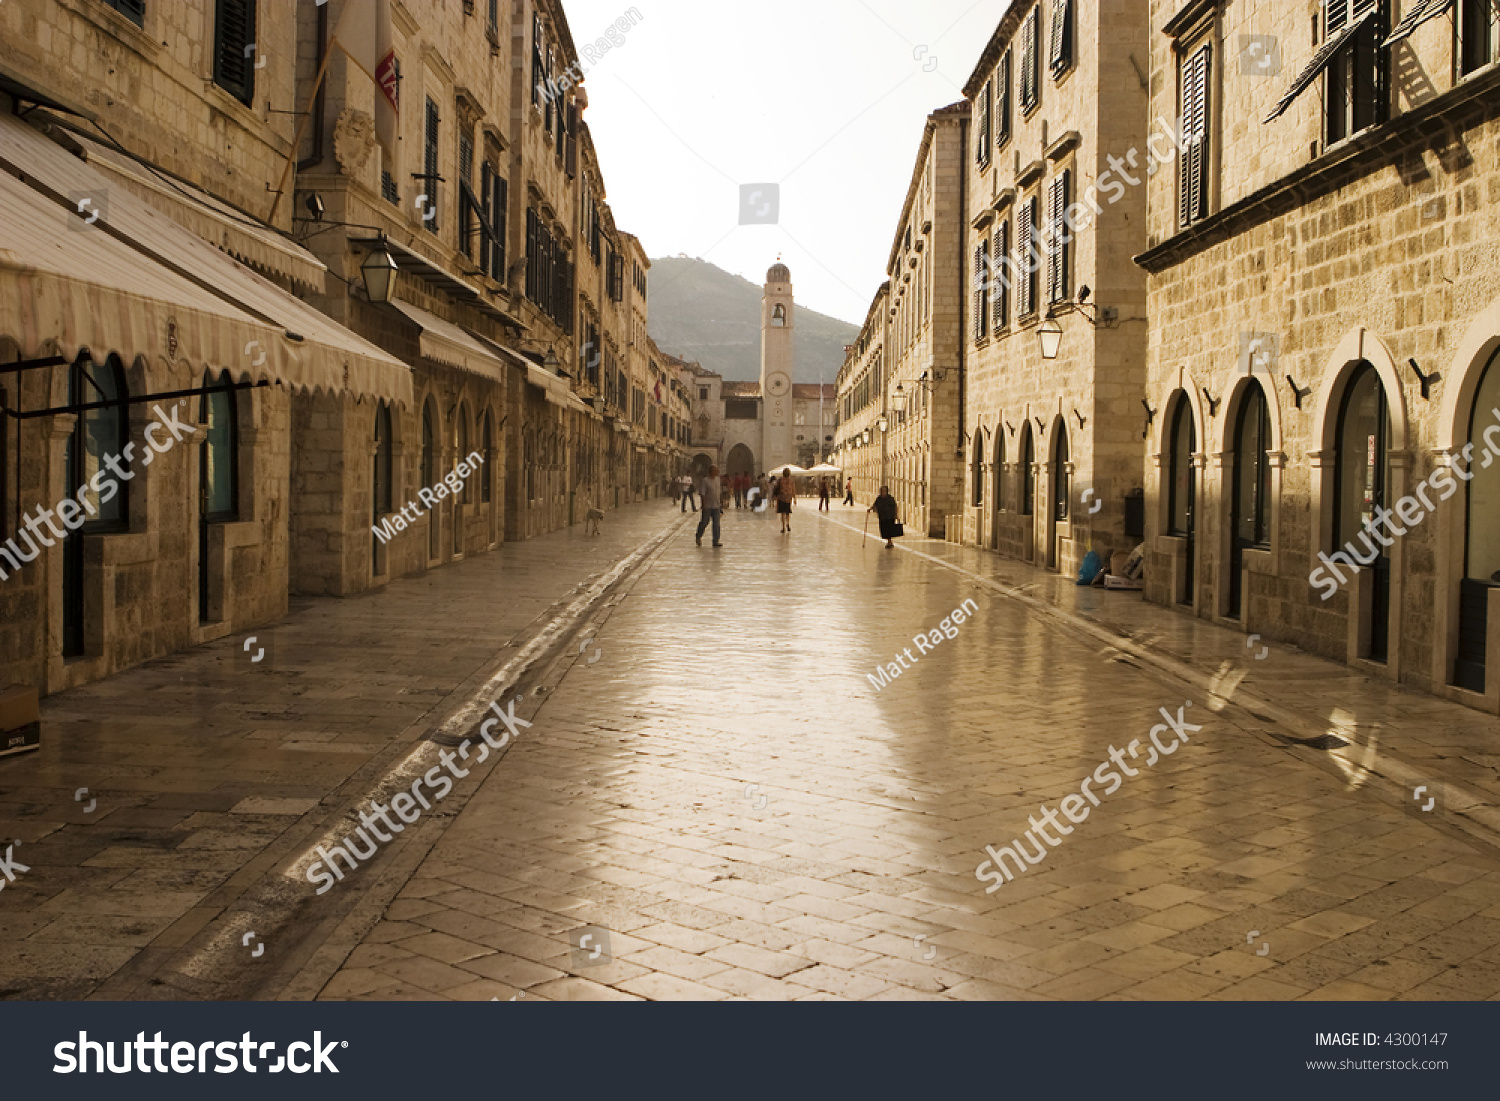 The Stradun (sometimes the Strada) is the main shopping street and gathering area in the city of Dubrovnik in Croatia. The cobblestones have been polished smooth over hundreds of years. #4300147